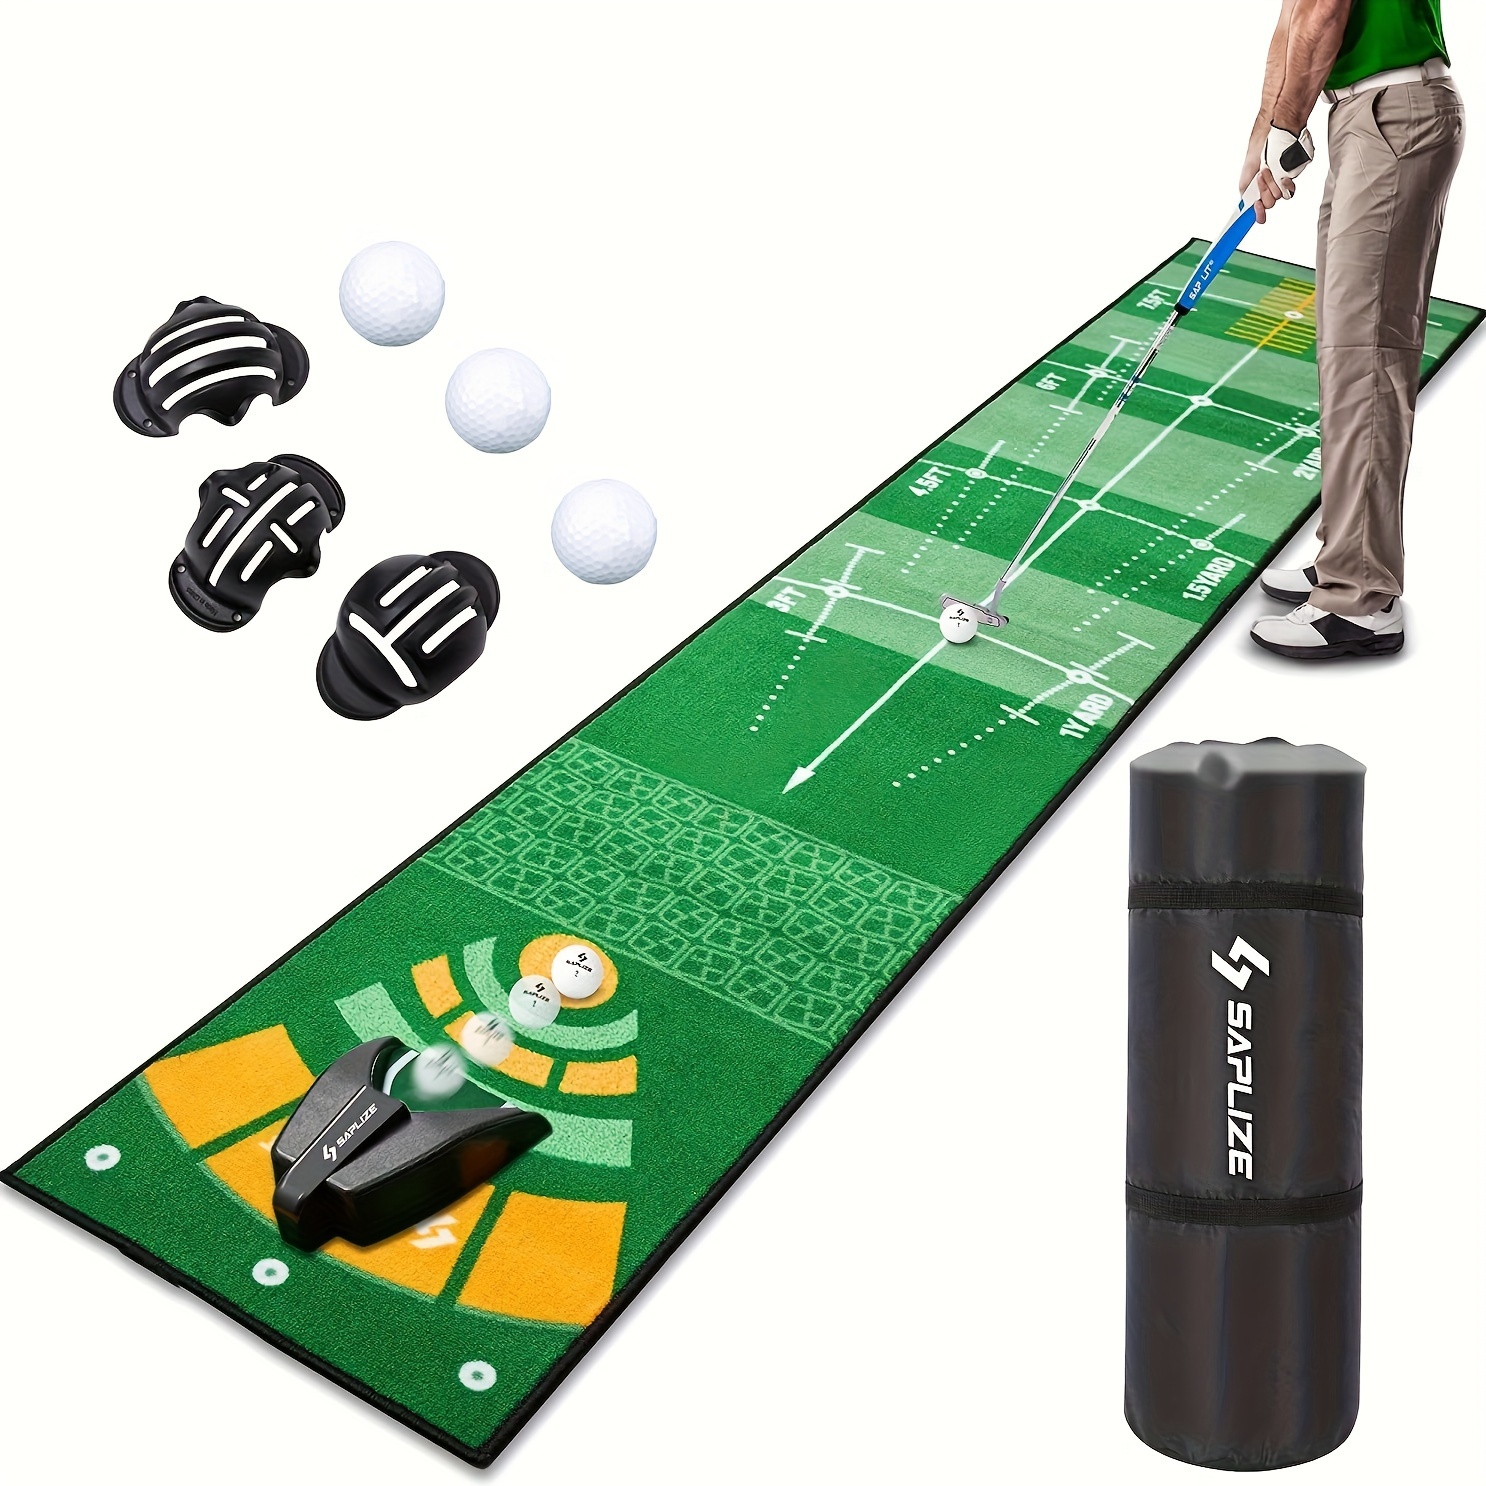 saplize golf putting mat 20in x 10ft golf putting green mat with non slip backing golf practice mat for indoor outdoor golf training aid details 0